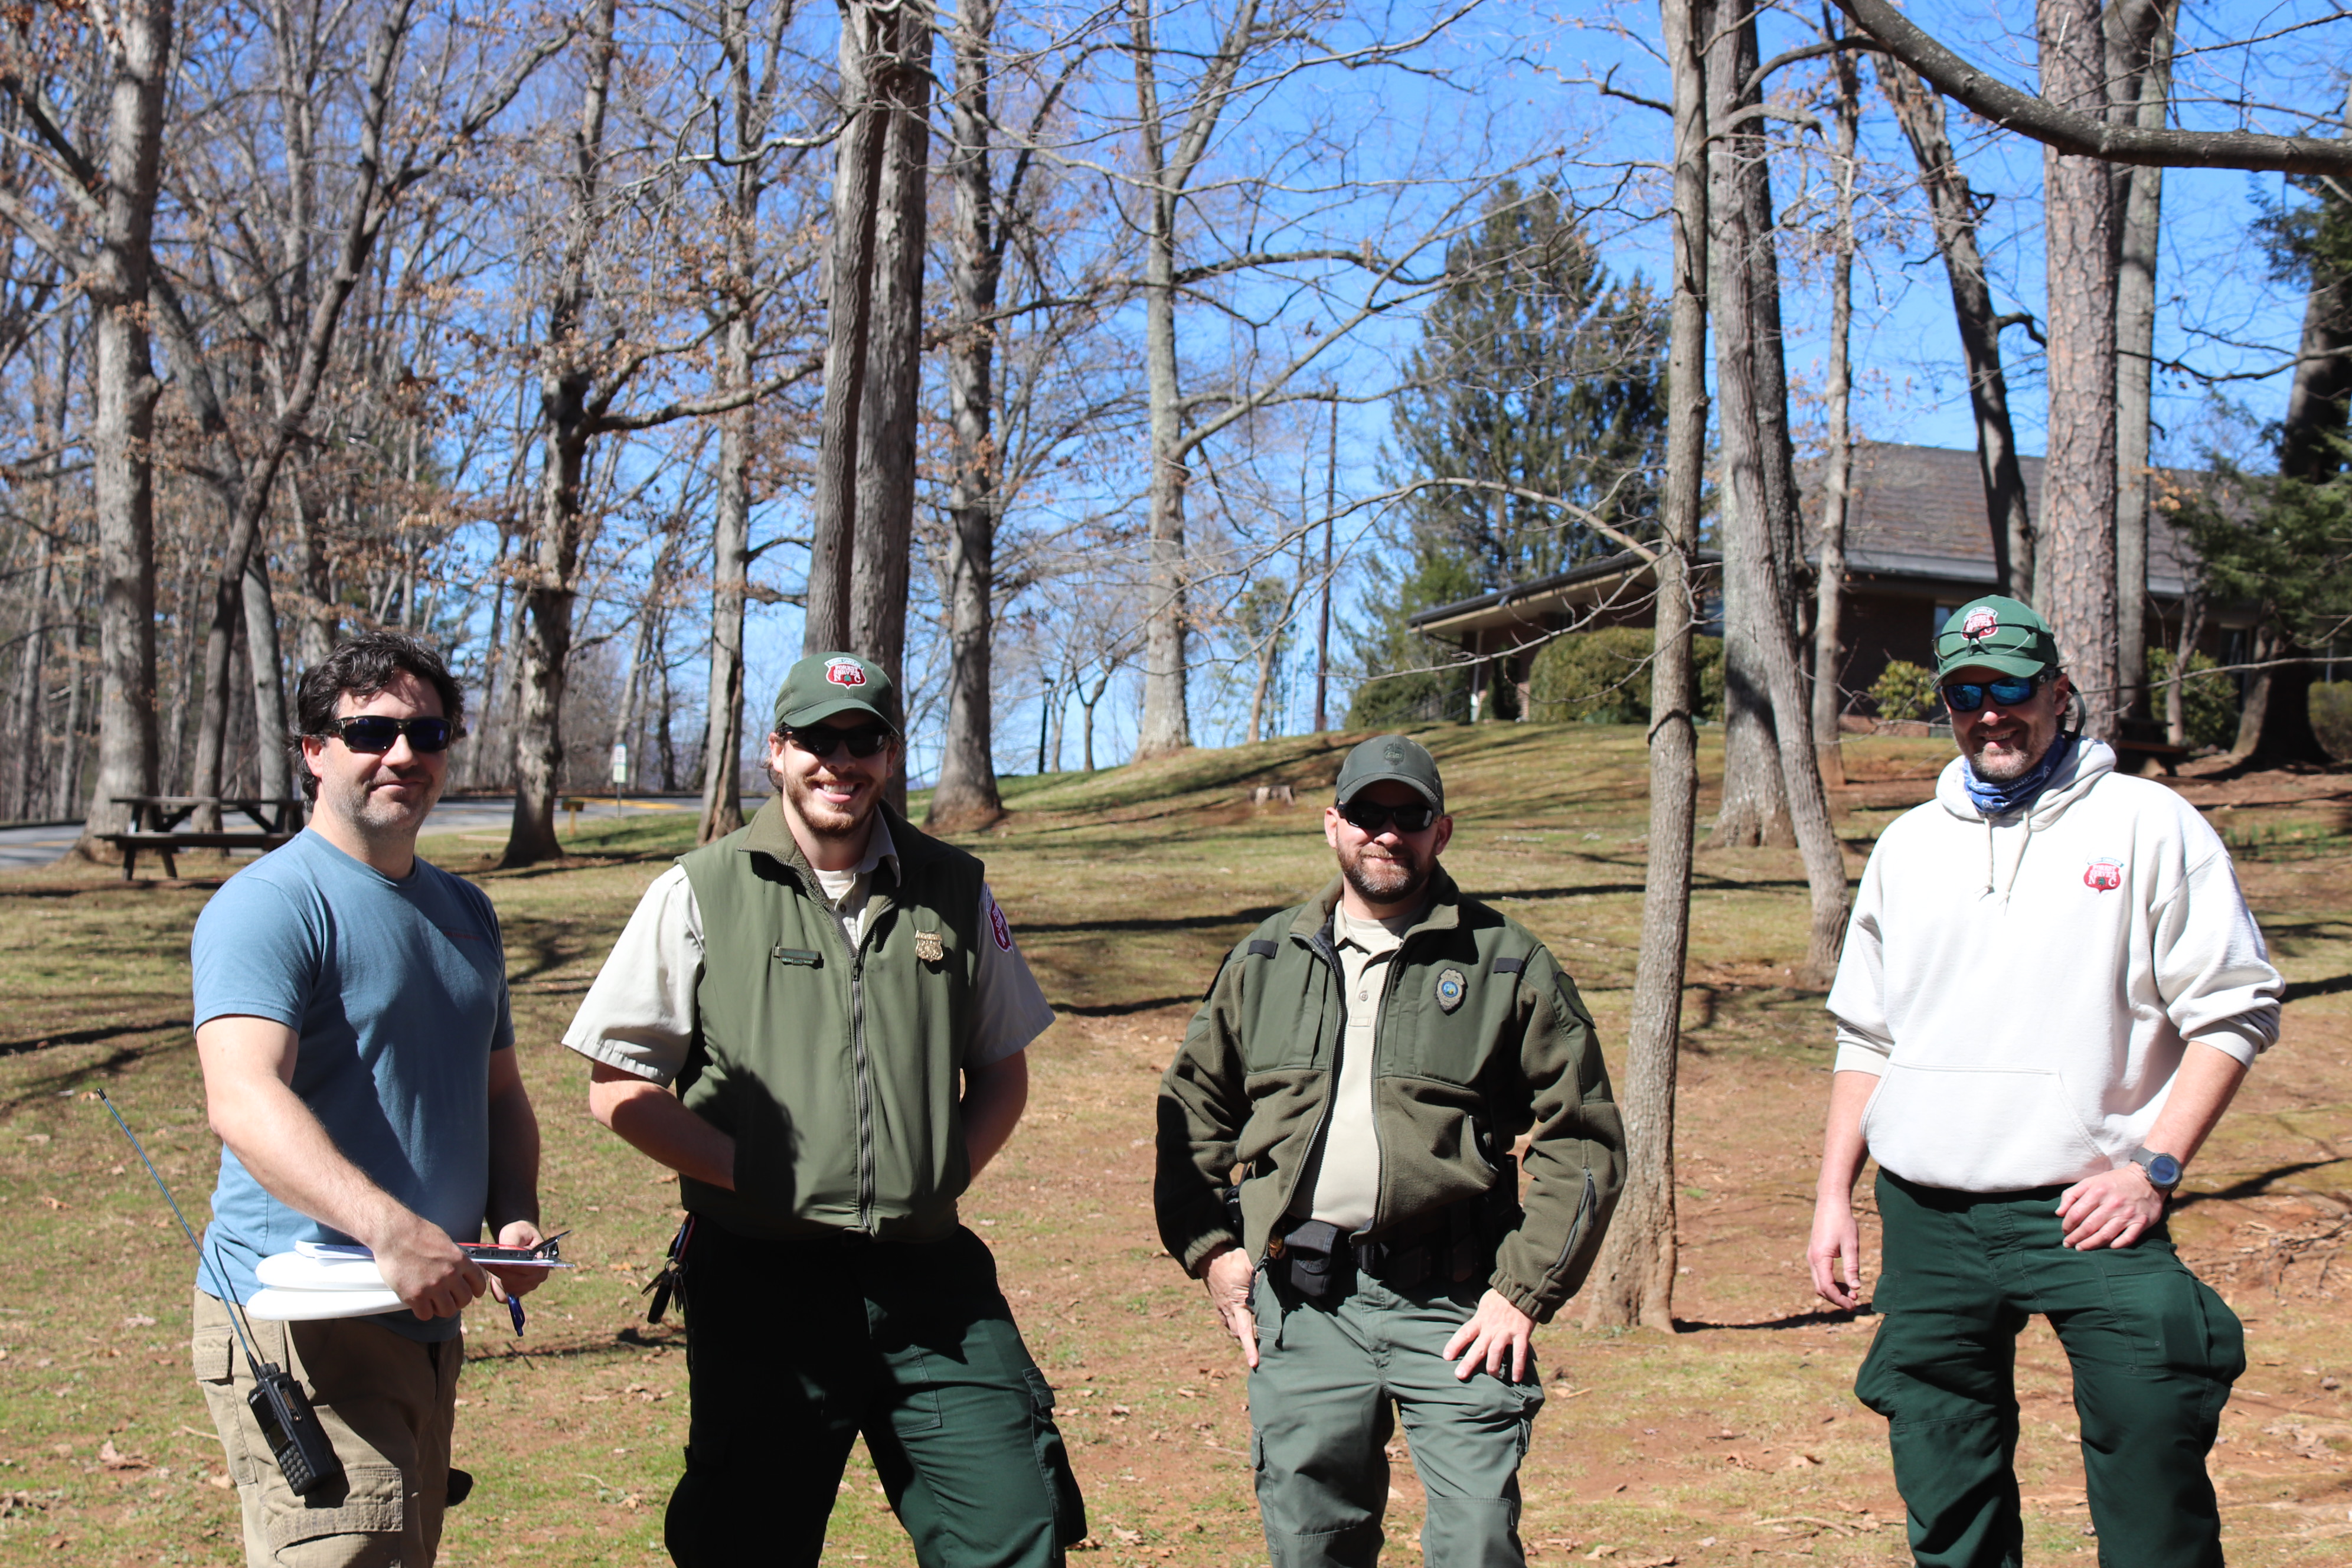 NC Forest Service people playing disc golf